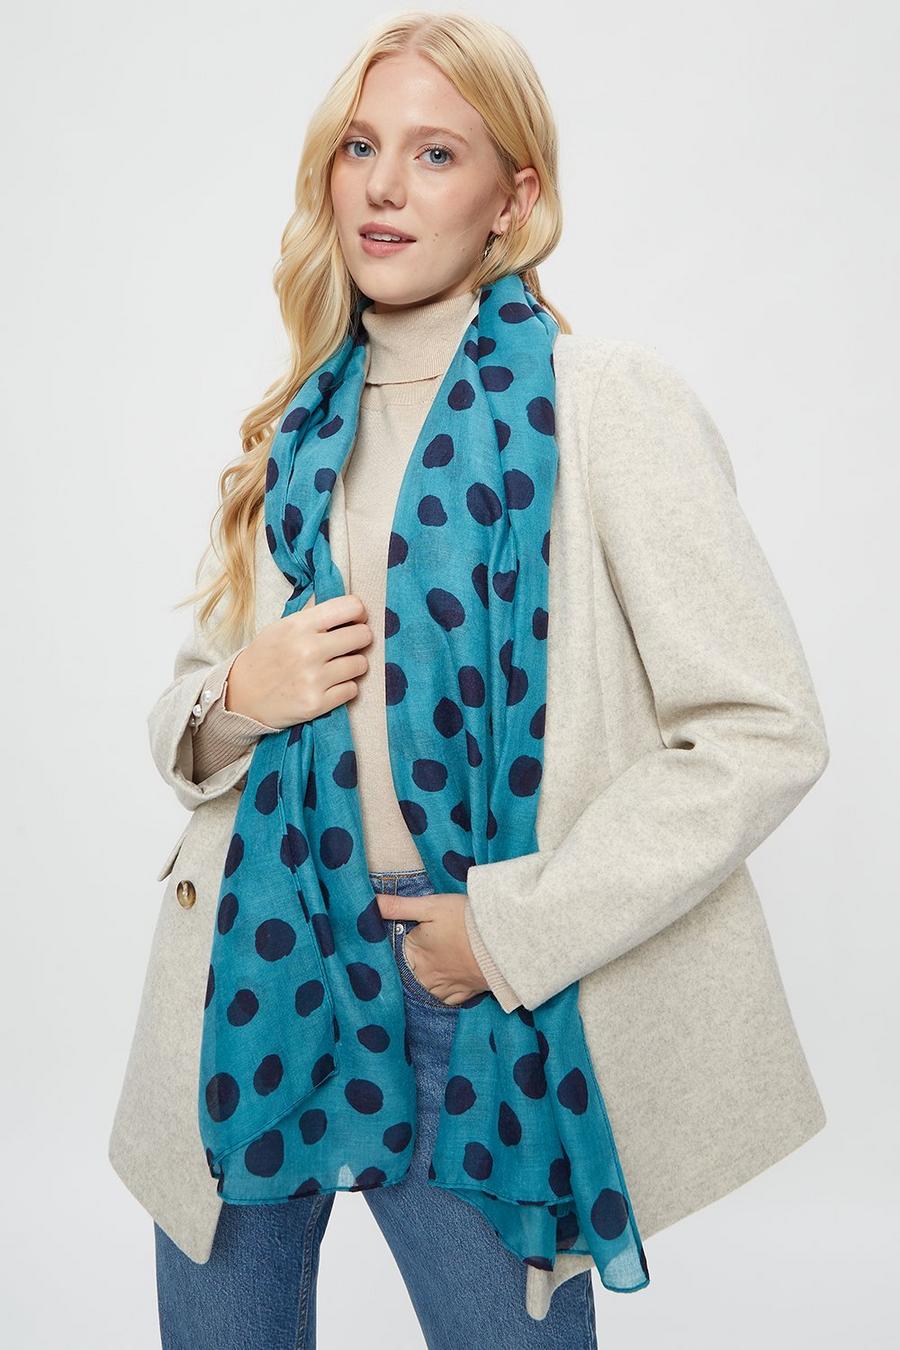 Blue And Black Spot Scarf